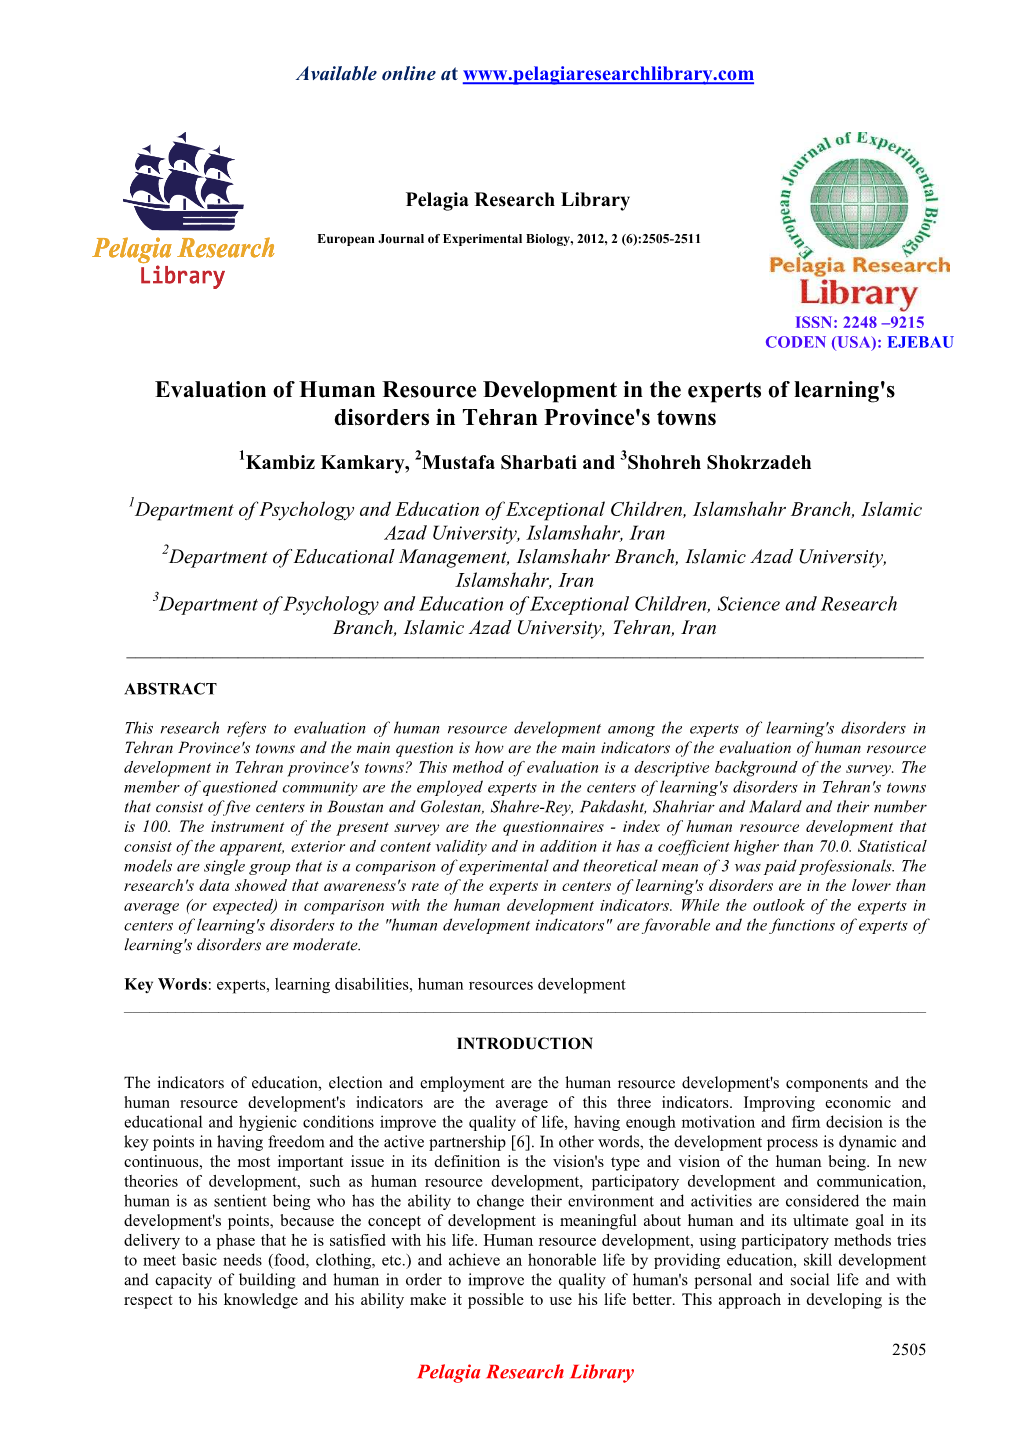 Evaluation of Human Resource Development in the Experts of Learning's Disorders in Tehran Province's Towns